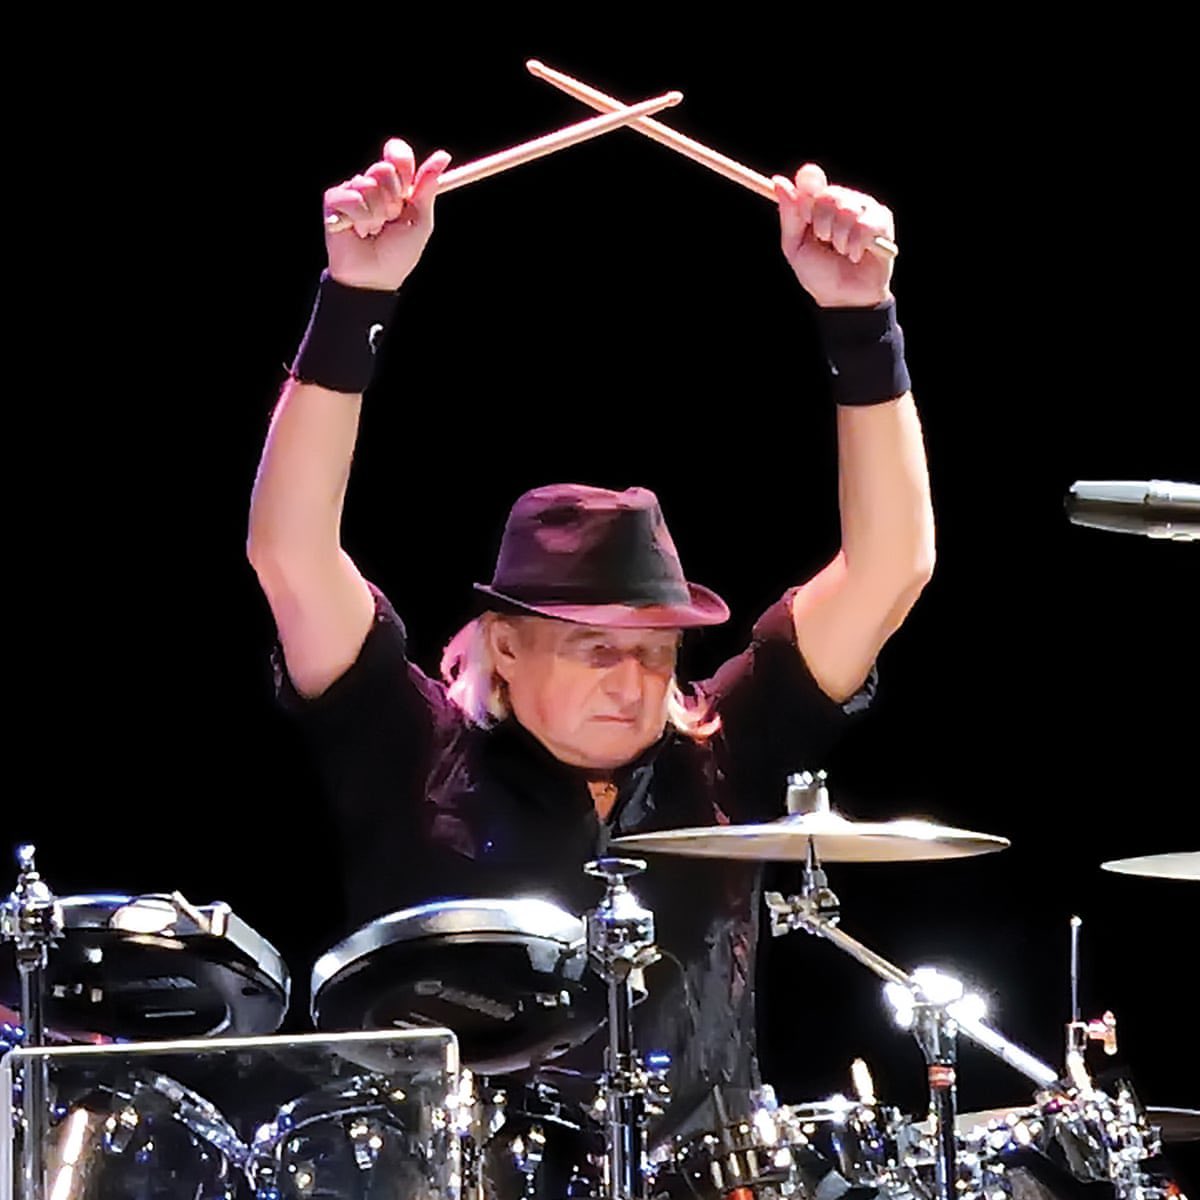 Remembering Alan White on the second anniversary of his passing. May his memory be a blessing. #Yes #AlanWhite